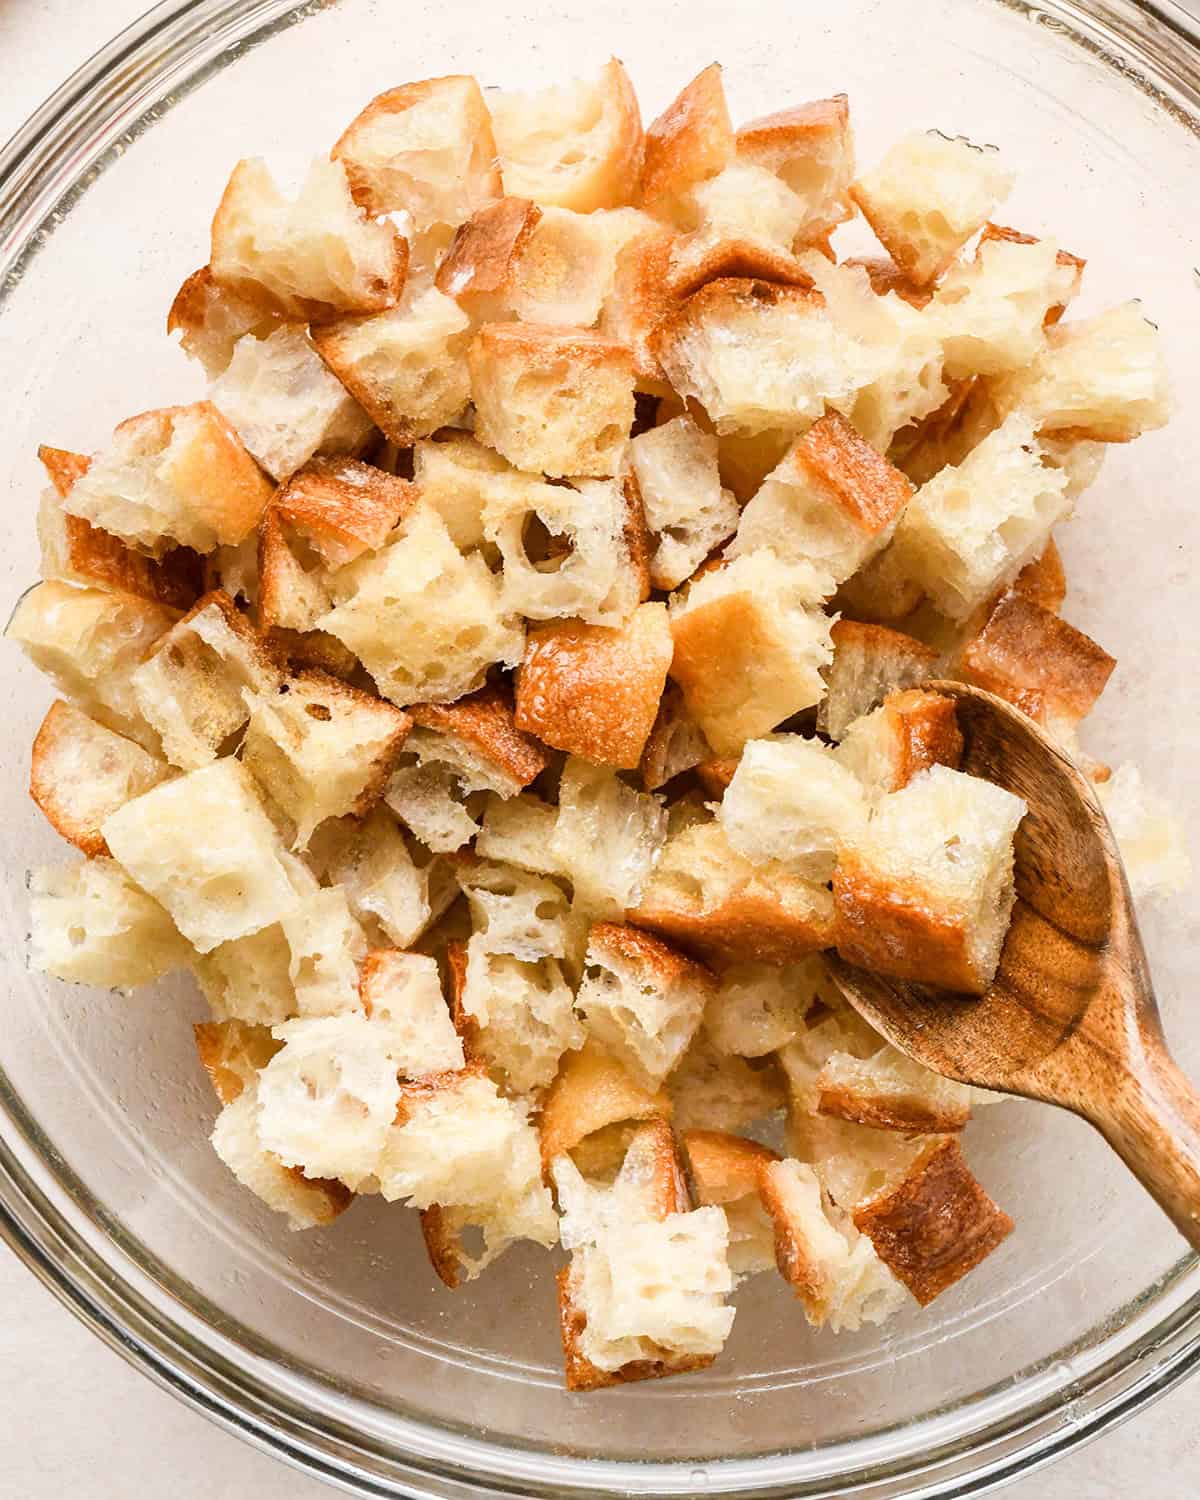 How to Make Croutons - stirring spices into bread with a wood spoon in a bowl